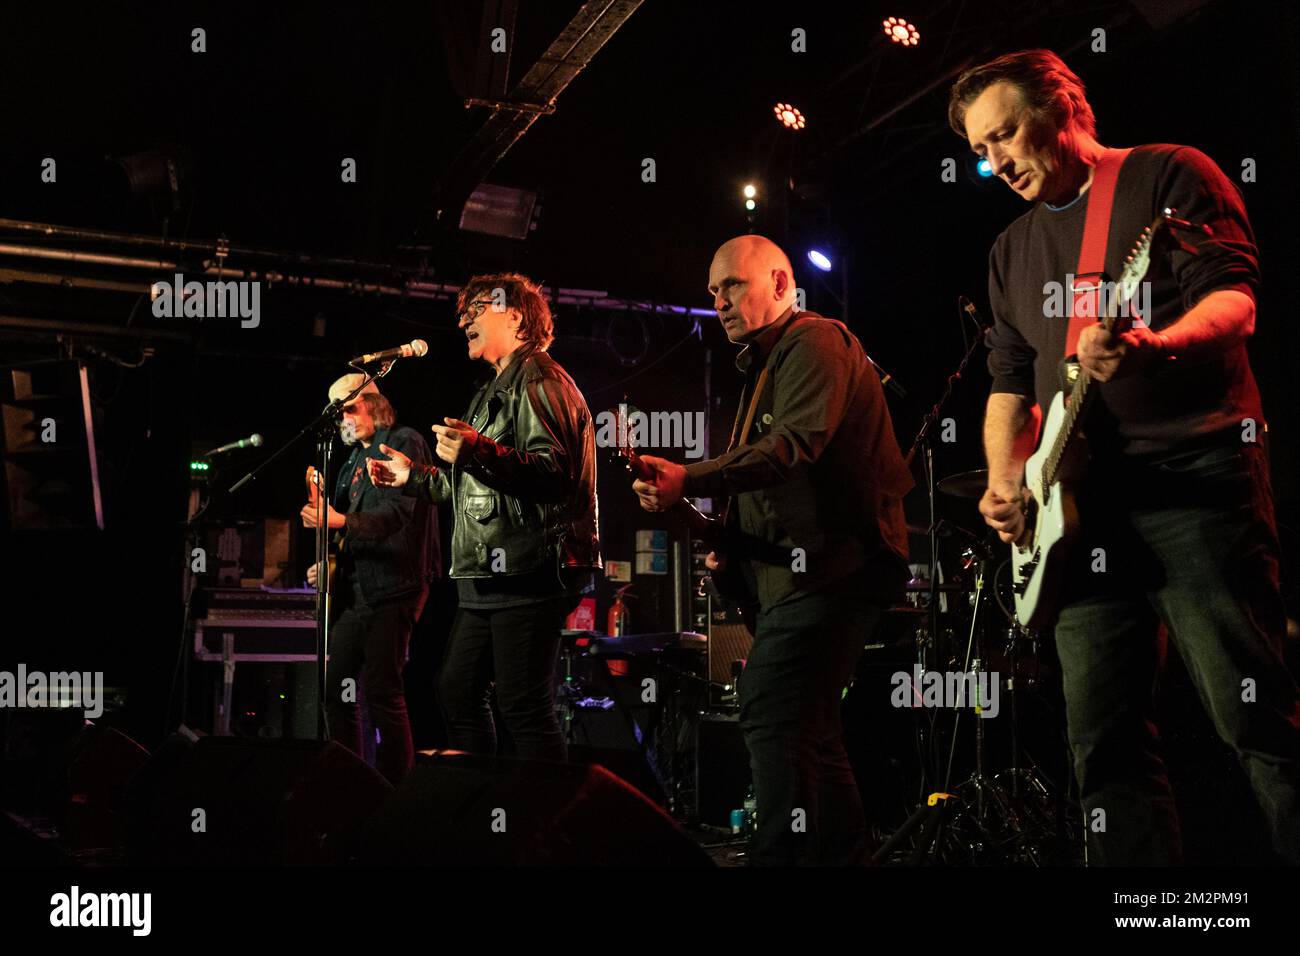 Oxford, United Kingdom. 13th, December 2022. The English rock band The Chameleons performs a live concert at the O2 Academy Oxford in Oxford. Here singer and bass player Mark Burgess is seen live on stage. (Photo credit: Gonzales Photo – Per-Otto Oppi). Stock Photo